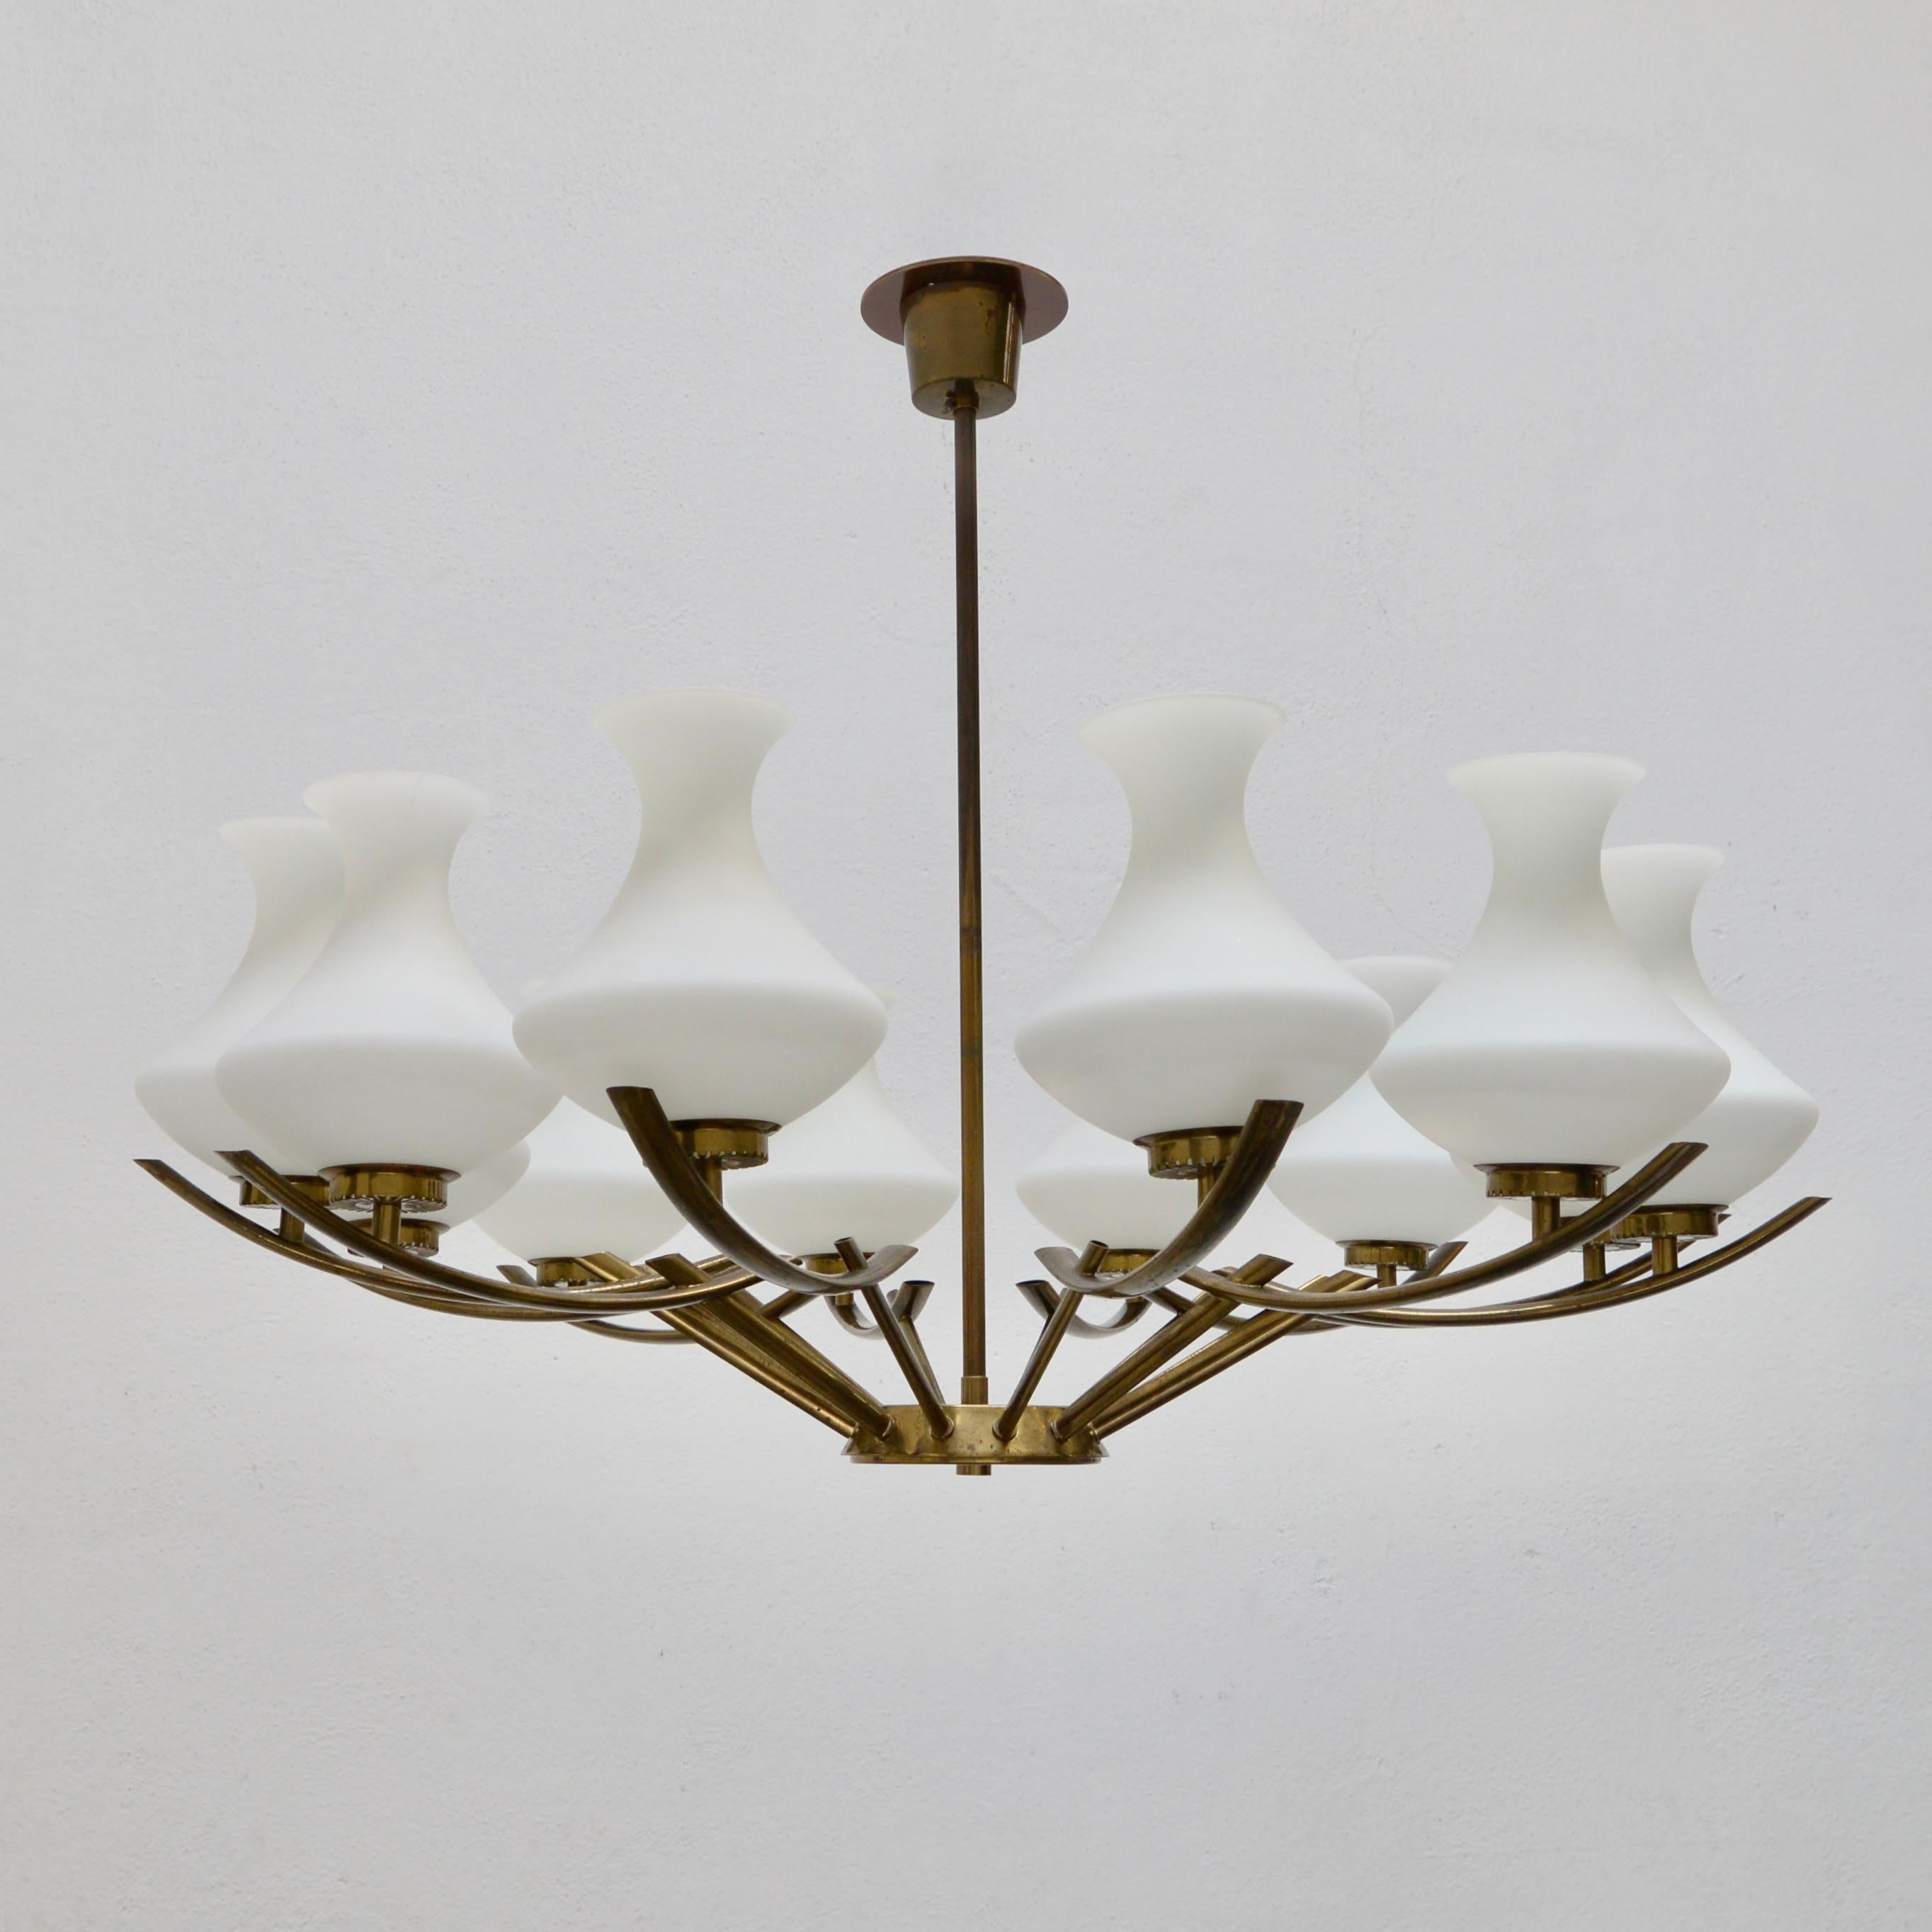 Of the period mid century Italian 12 shade 1950s naturally aged brass chandelier with hand blown glass shades. Wired with 12-E12 candelabra based sockets. Wired for use in the US. Light bulbs included with order.
Measurements:
OAD: 27” 
Diameter: